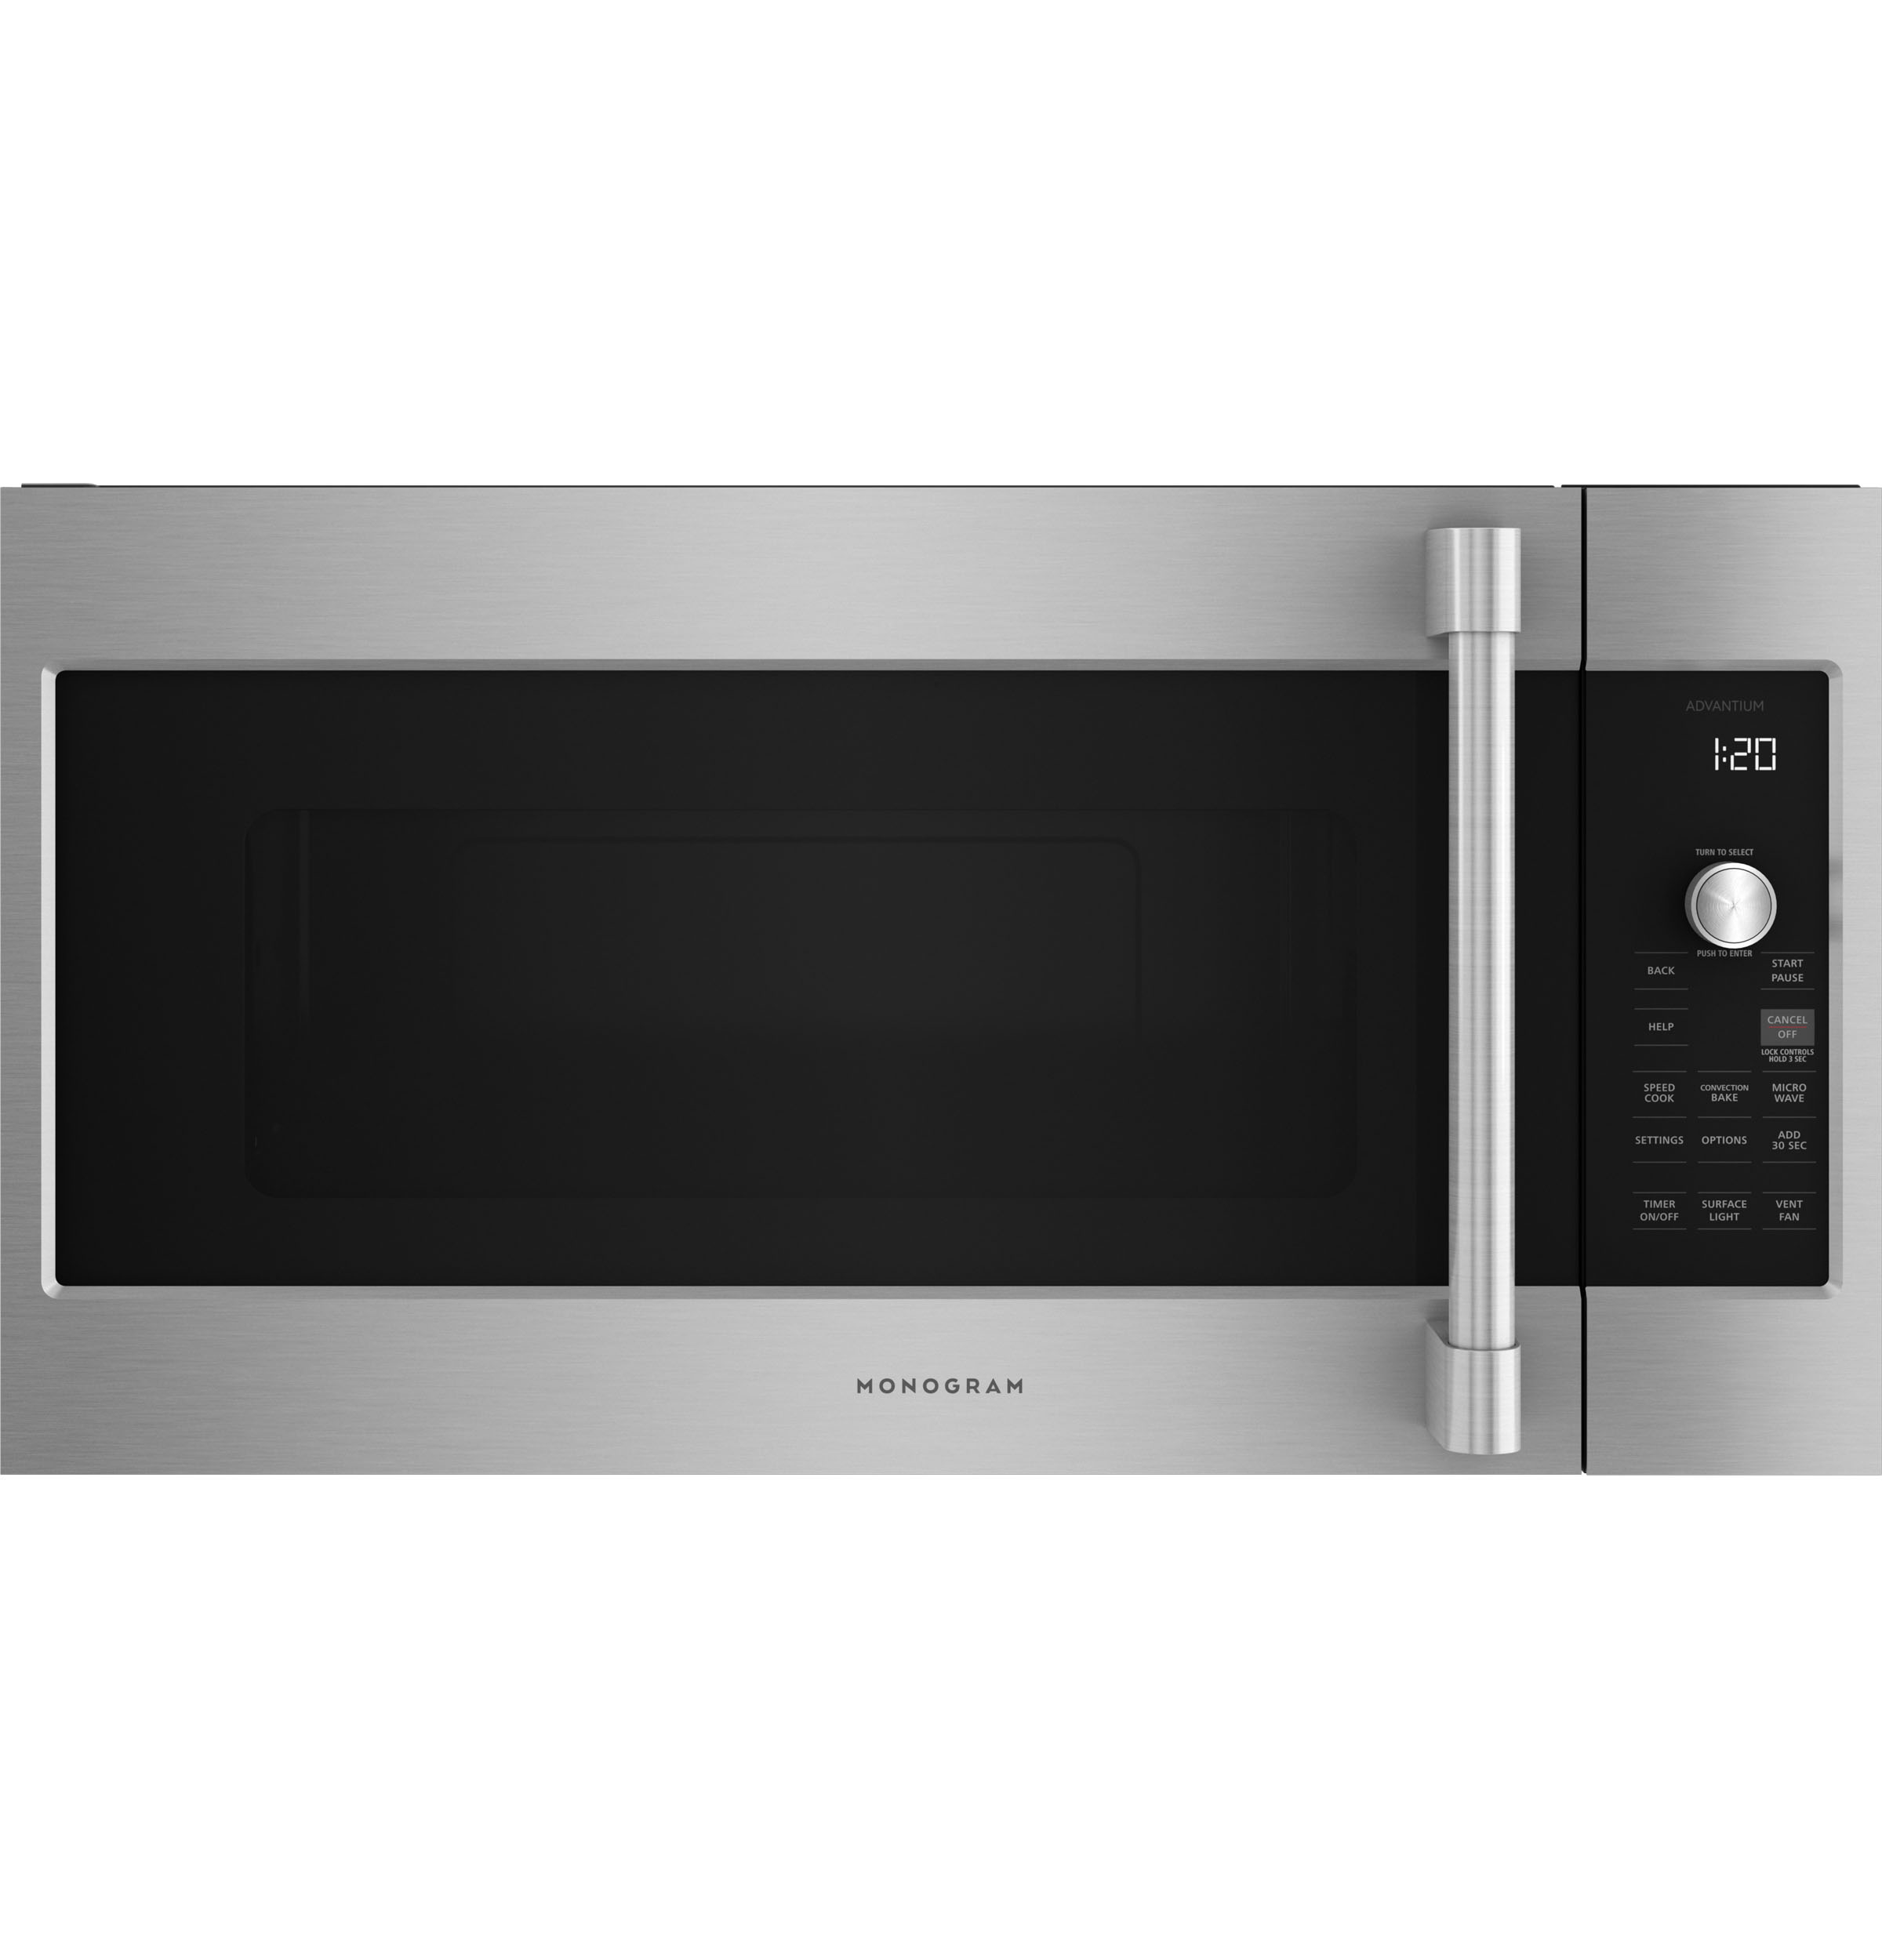 Monogram Statement Above-the-Cooktop Speedcooking Oven with Advantium® Technology